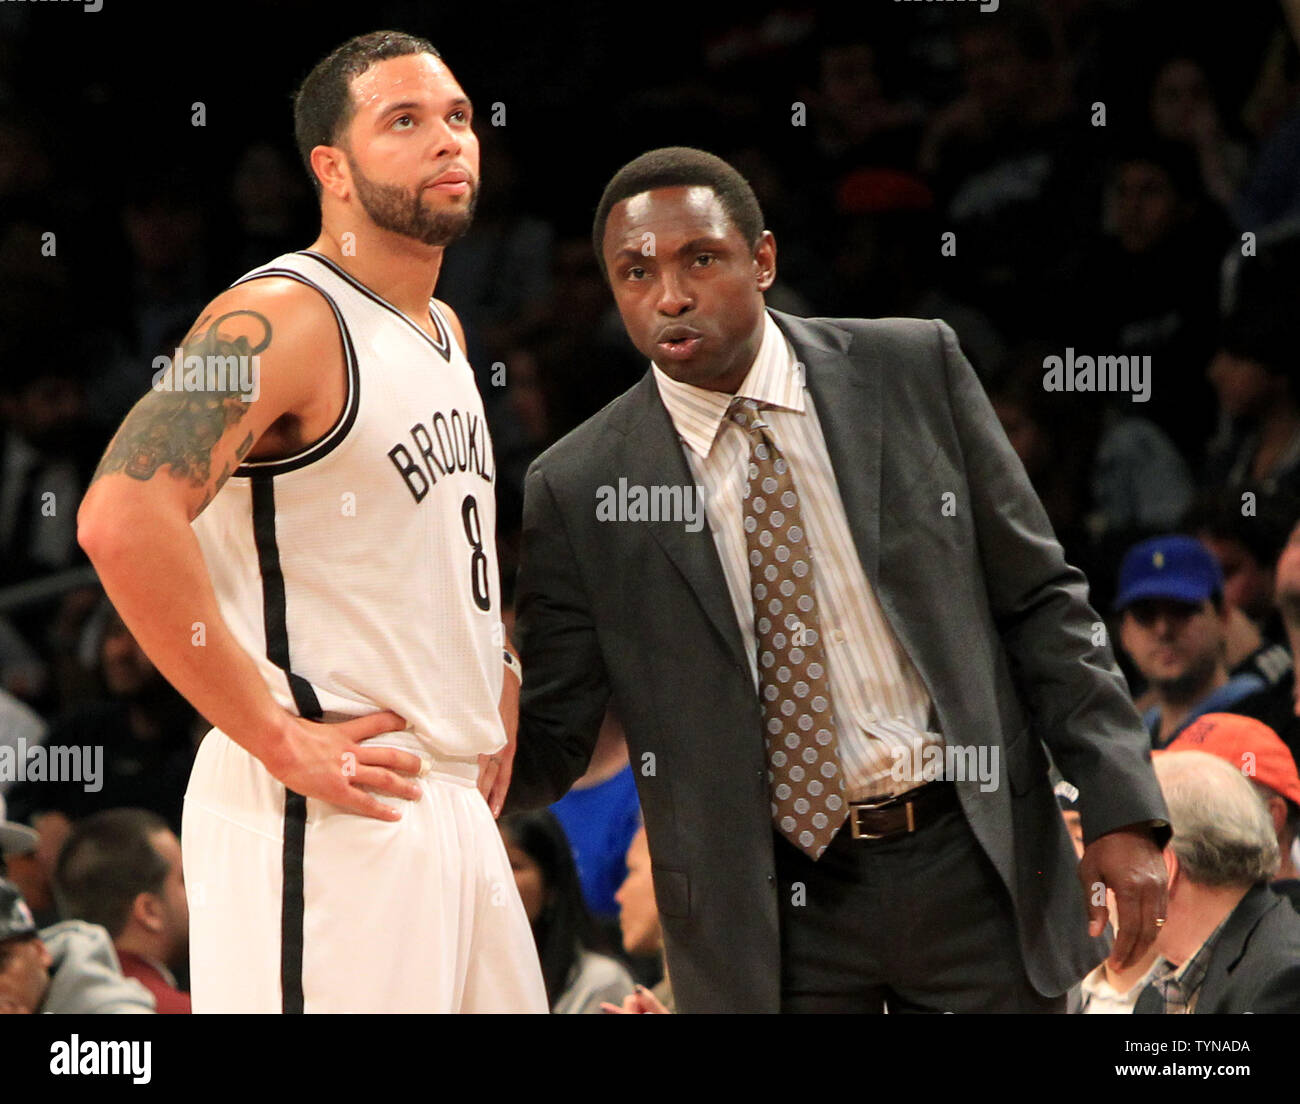 Brooklyn Nets guard Deron Williams (8) talks with Brooklyn Nets head coach Avery Johnson during the first half against Orlando Magic at the Barclays Center in New York City on November 11, 2012.       UPI/Nicole Sweet Stock Photo